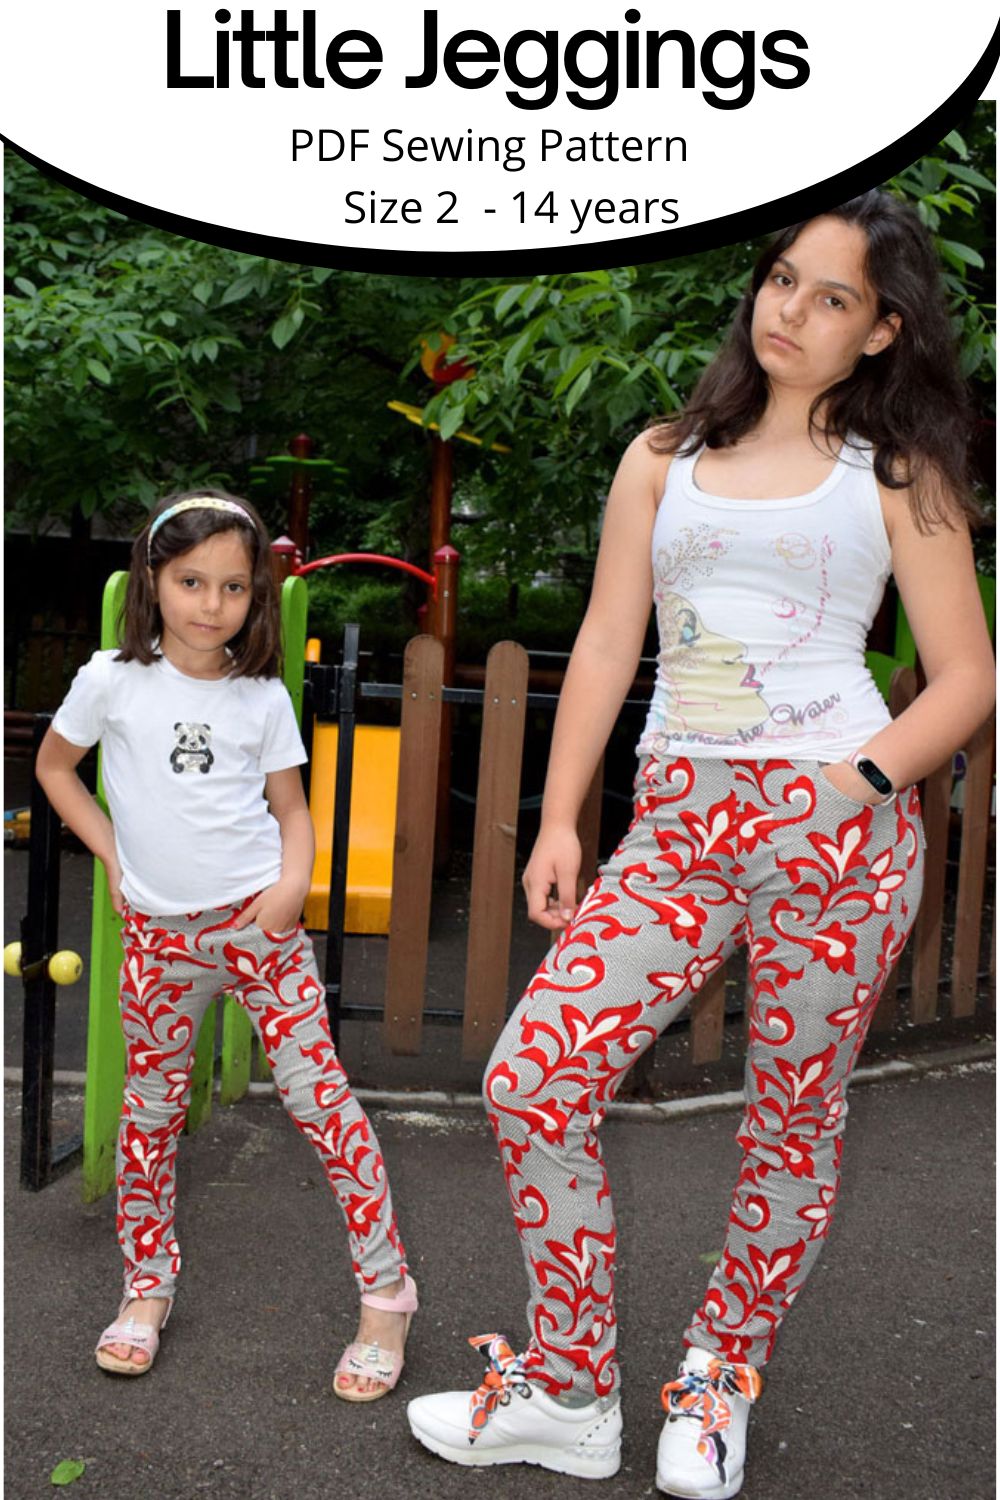 Little Jeggings - PDF Sewing Pattern in Kids Sizes - Sewing For A Living